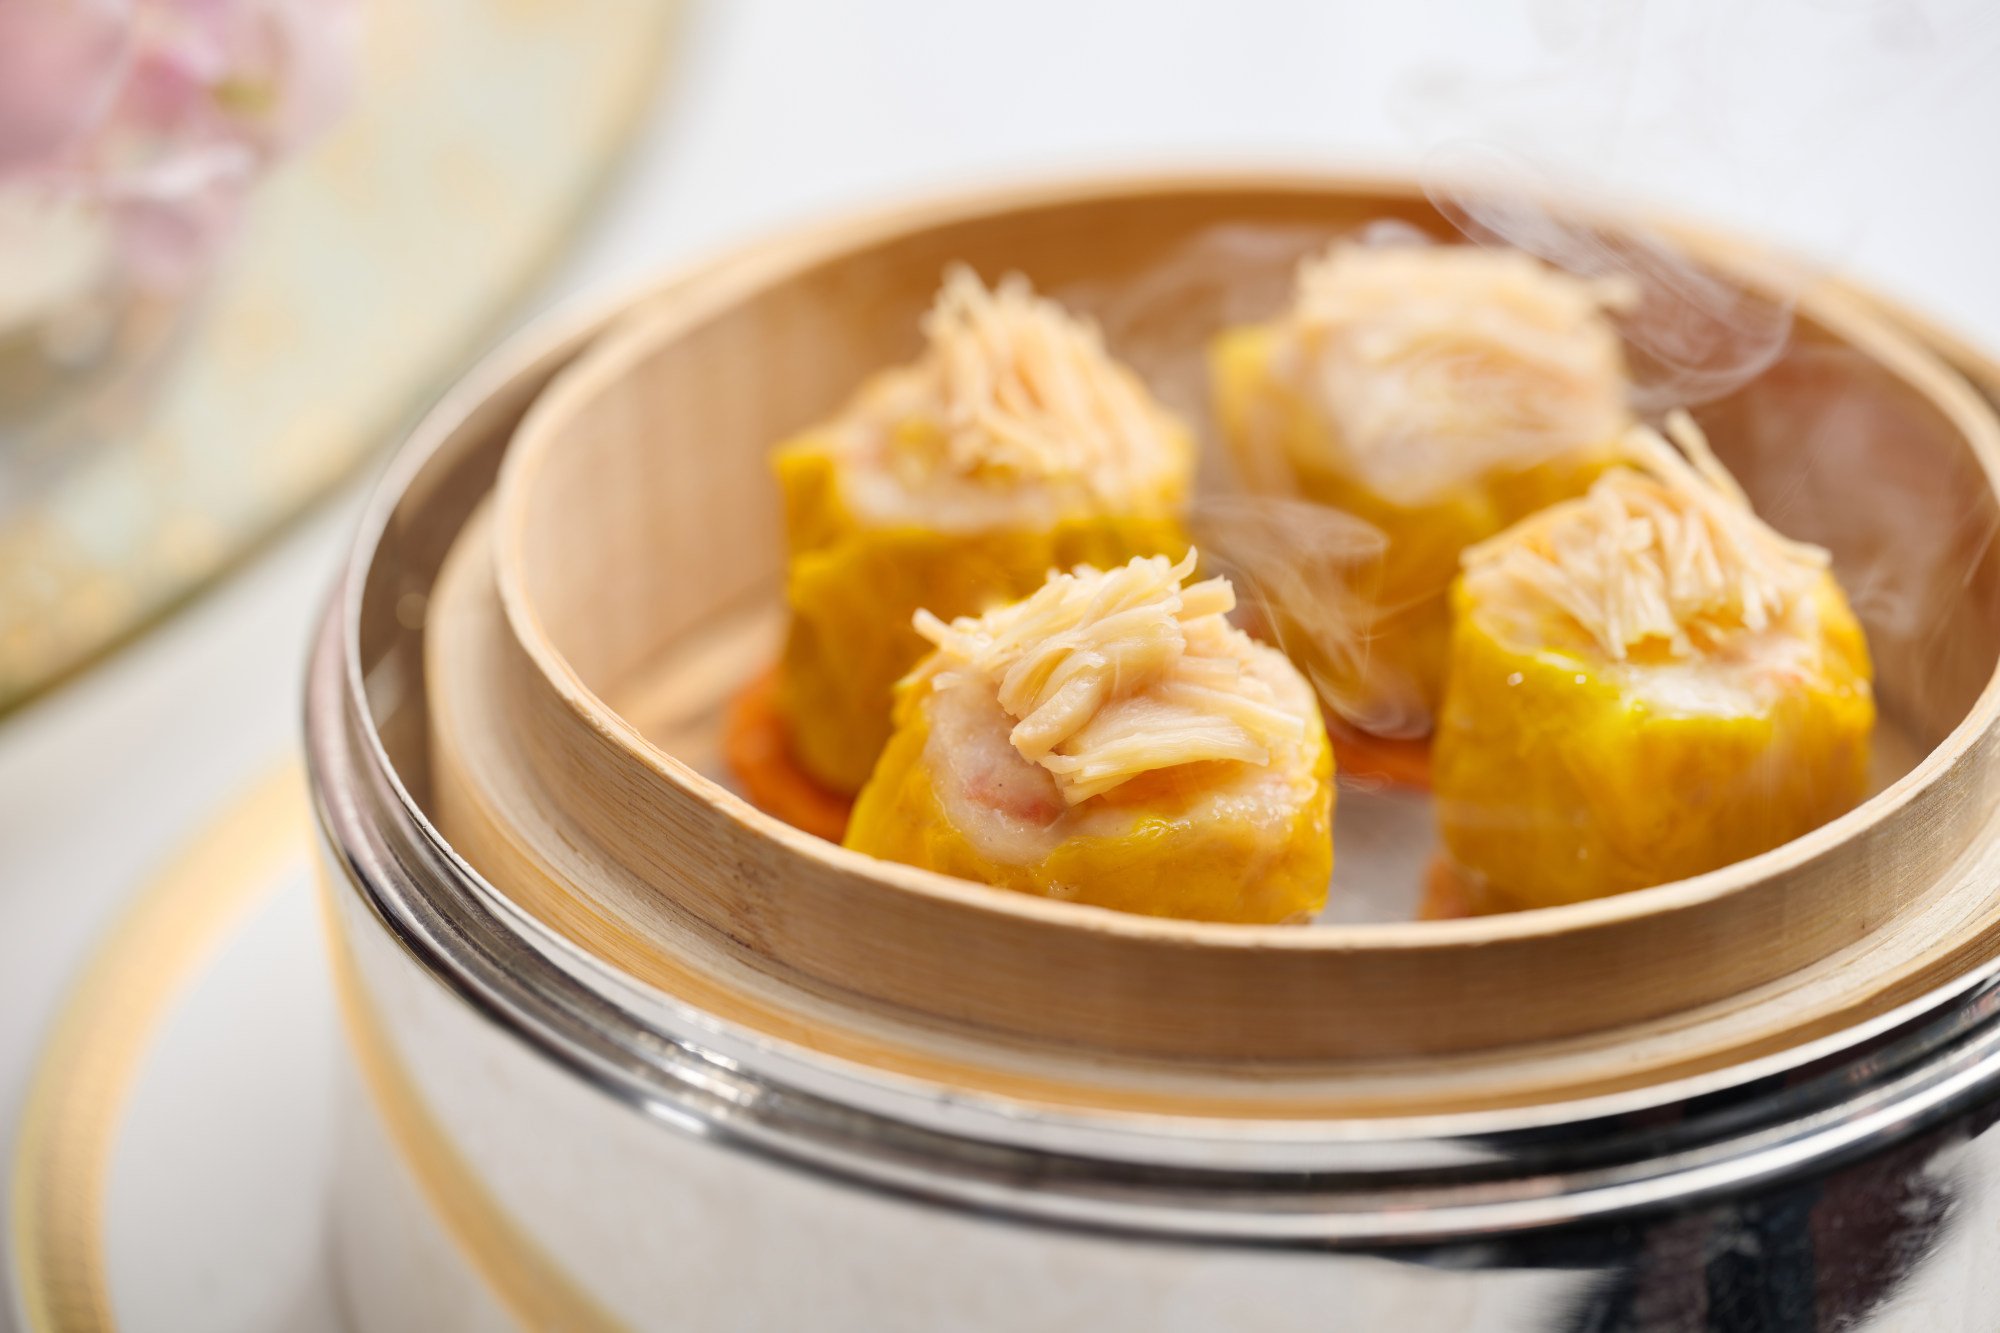 the world is borrowing from cantonese cuisine – but is it a threat to authenticity?